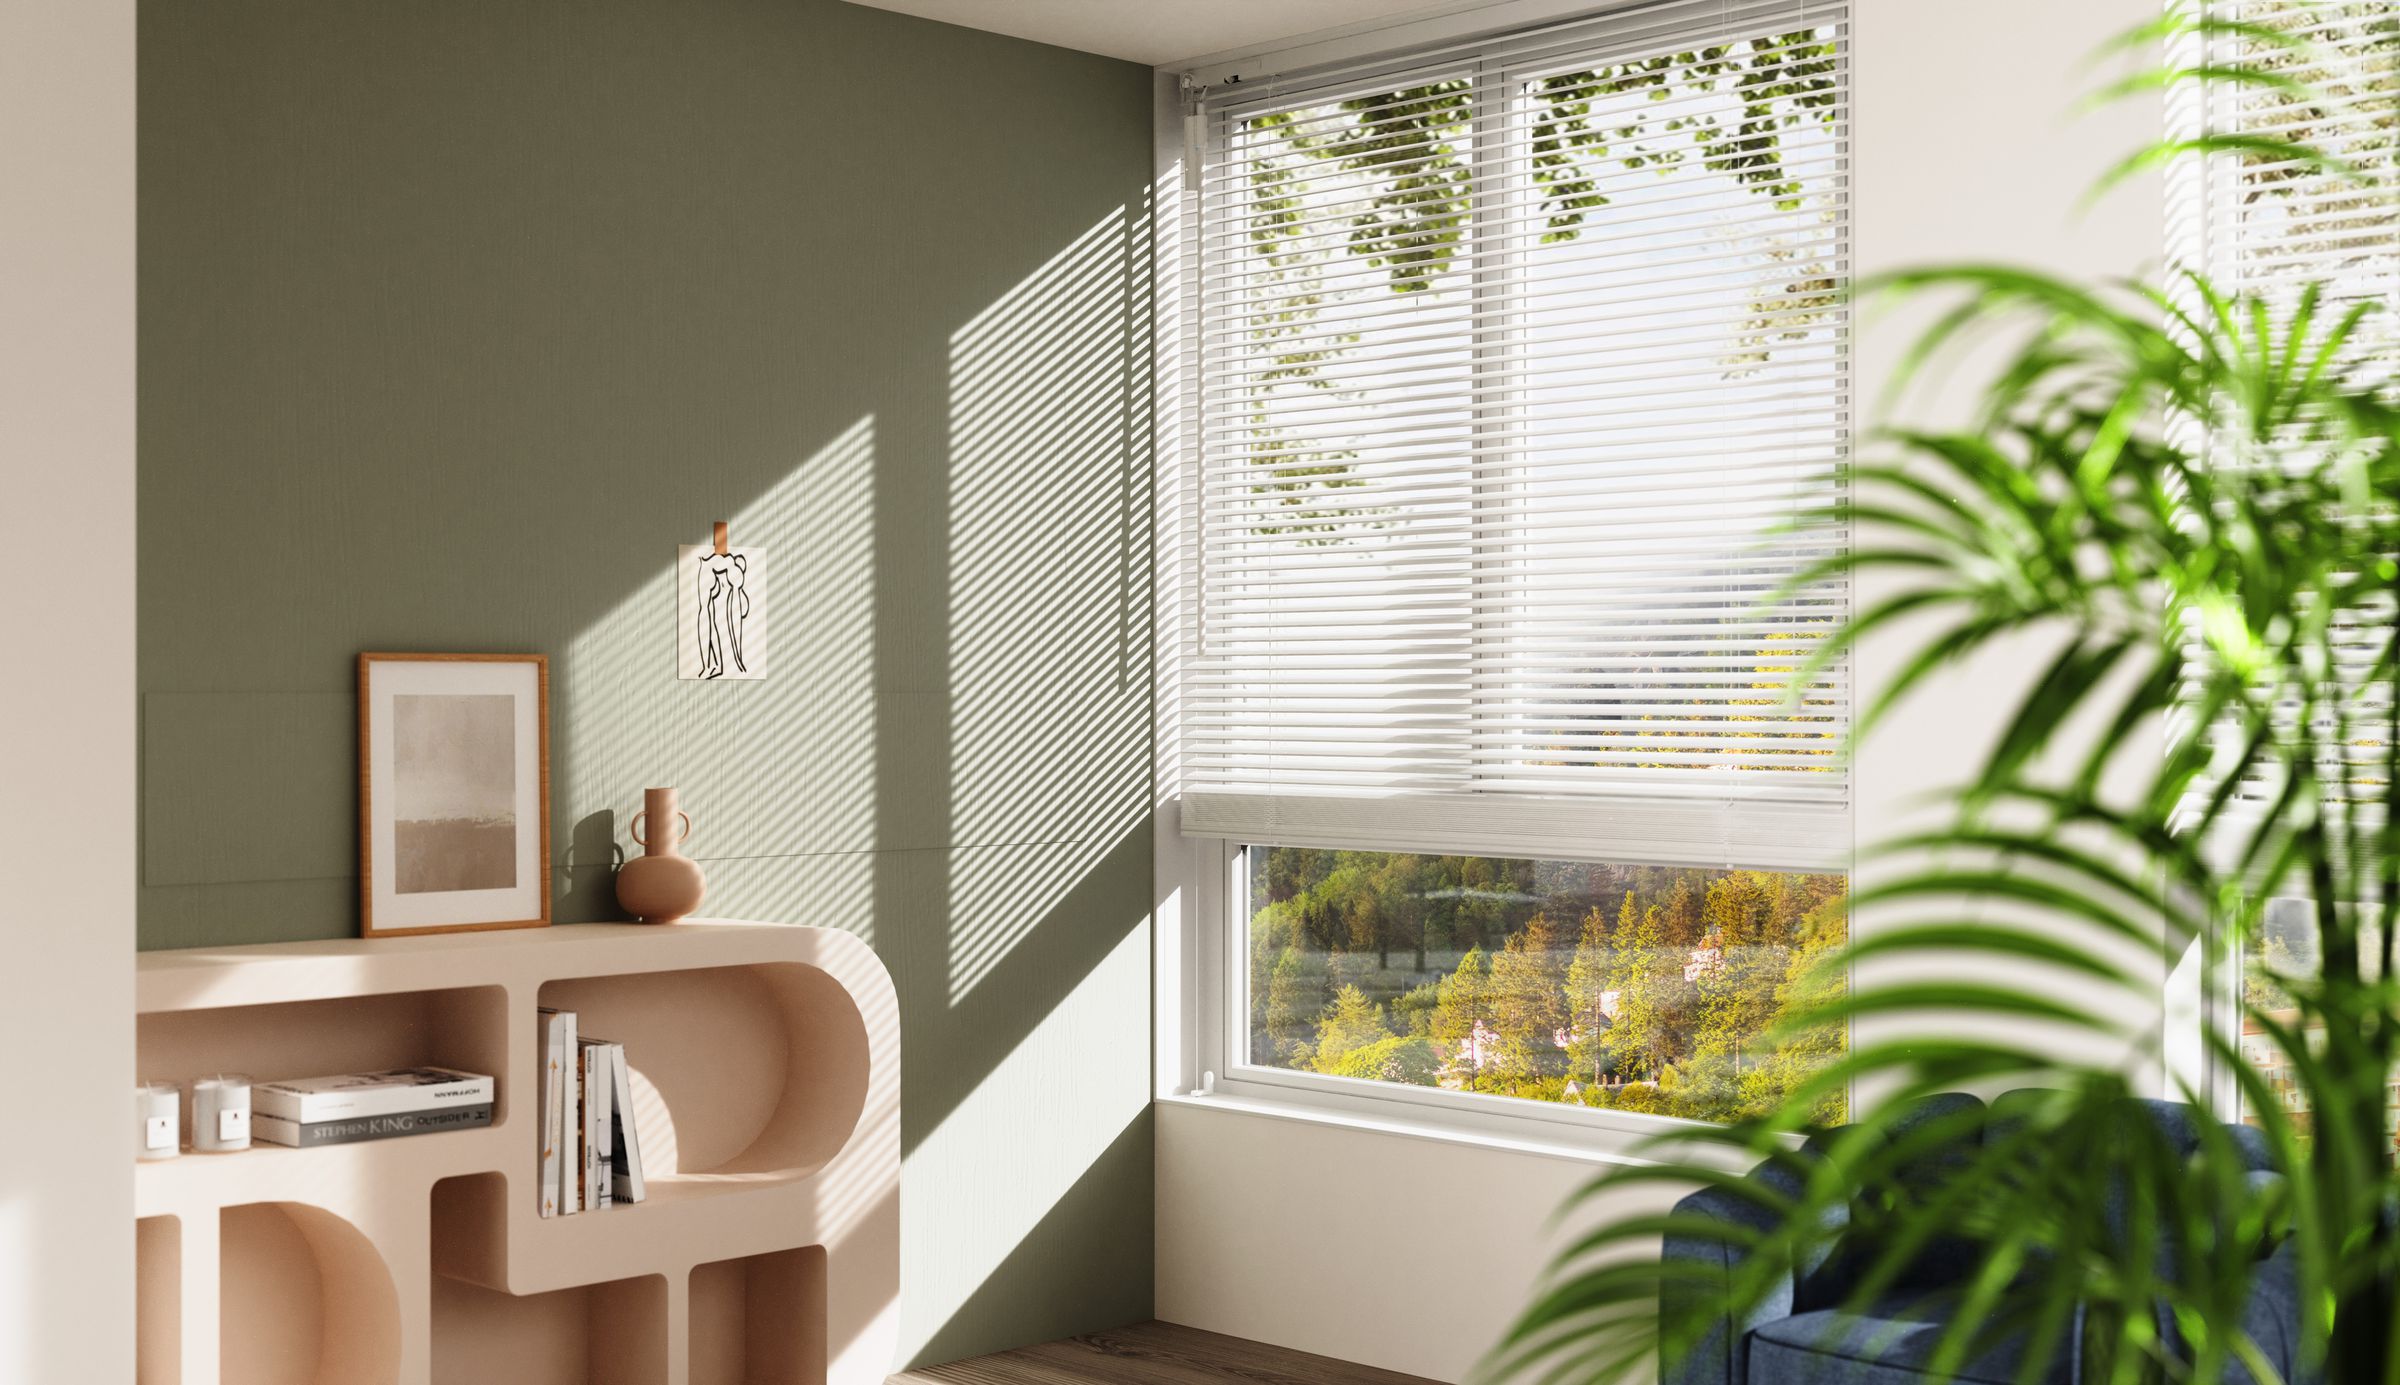 A retrofit device, the SwitchBot tilts the blinds for you but doesn’t raise or lower them.